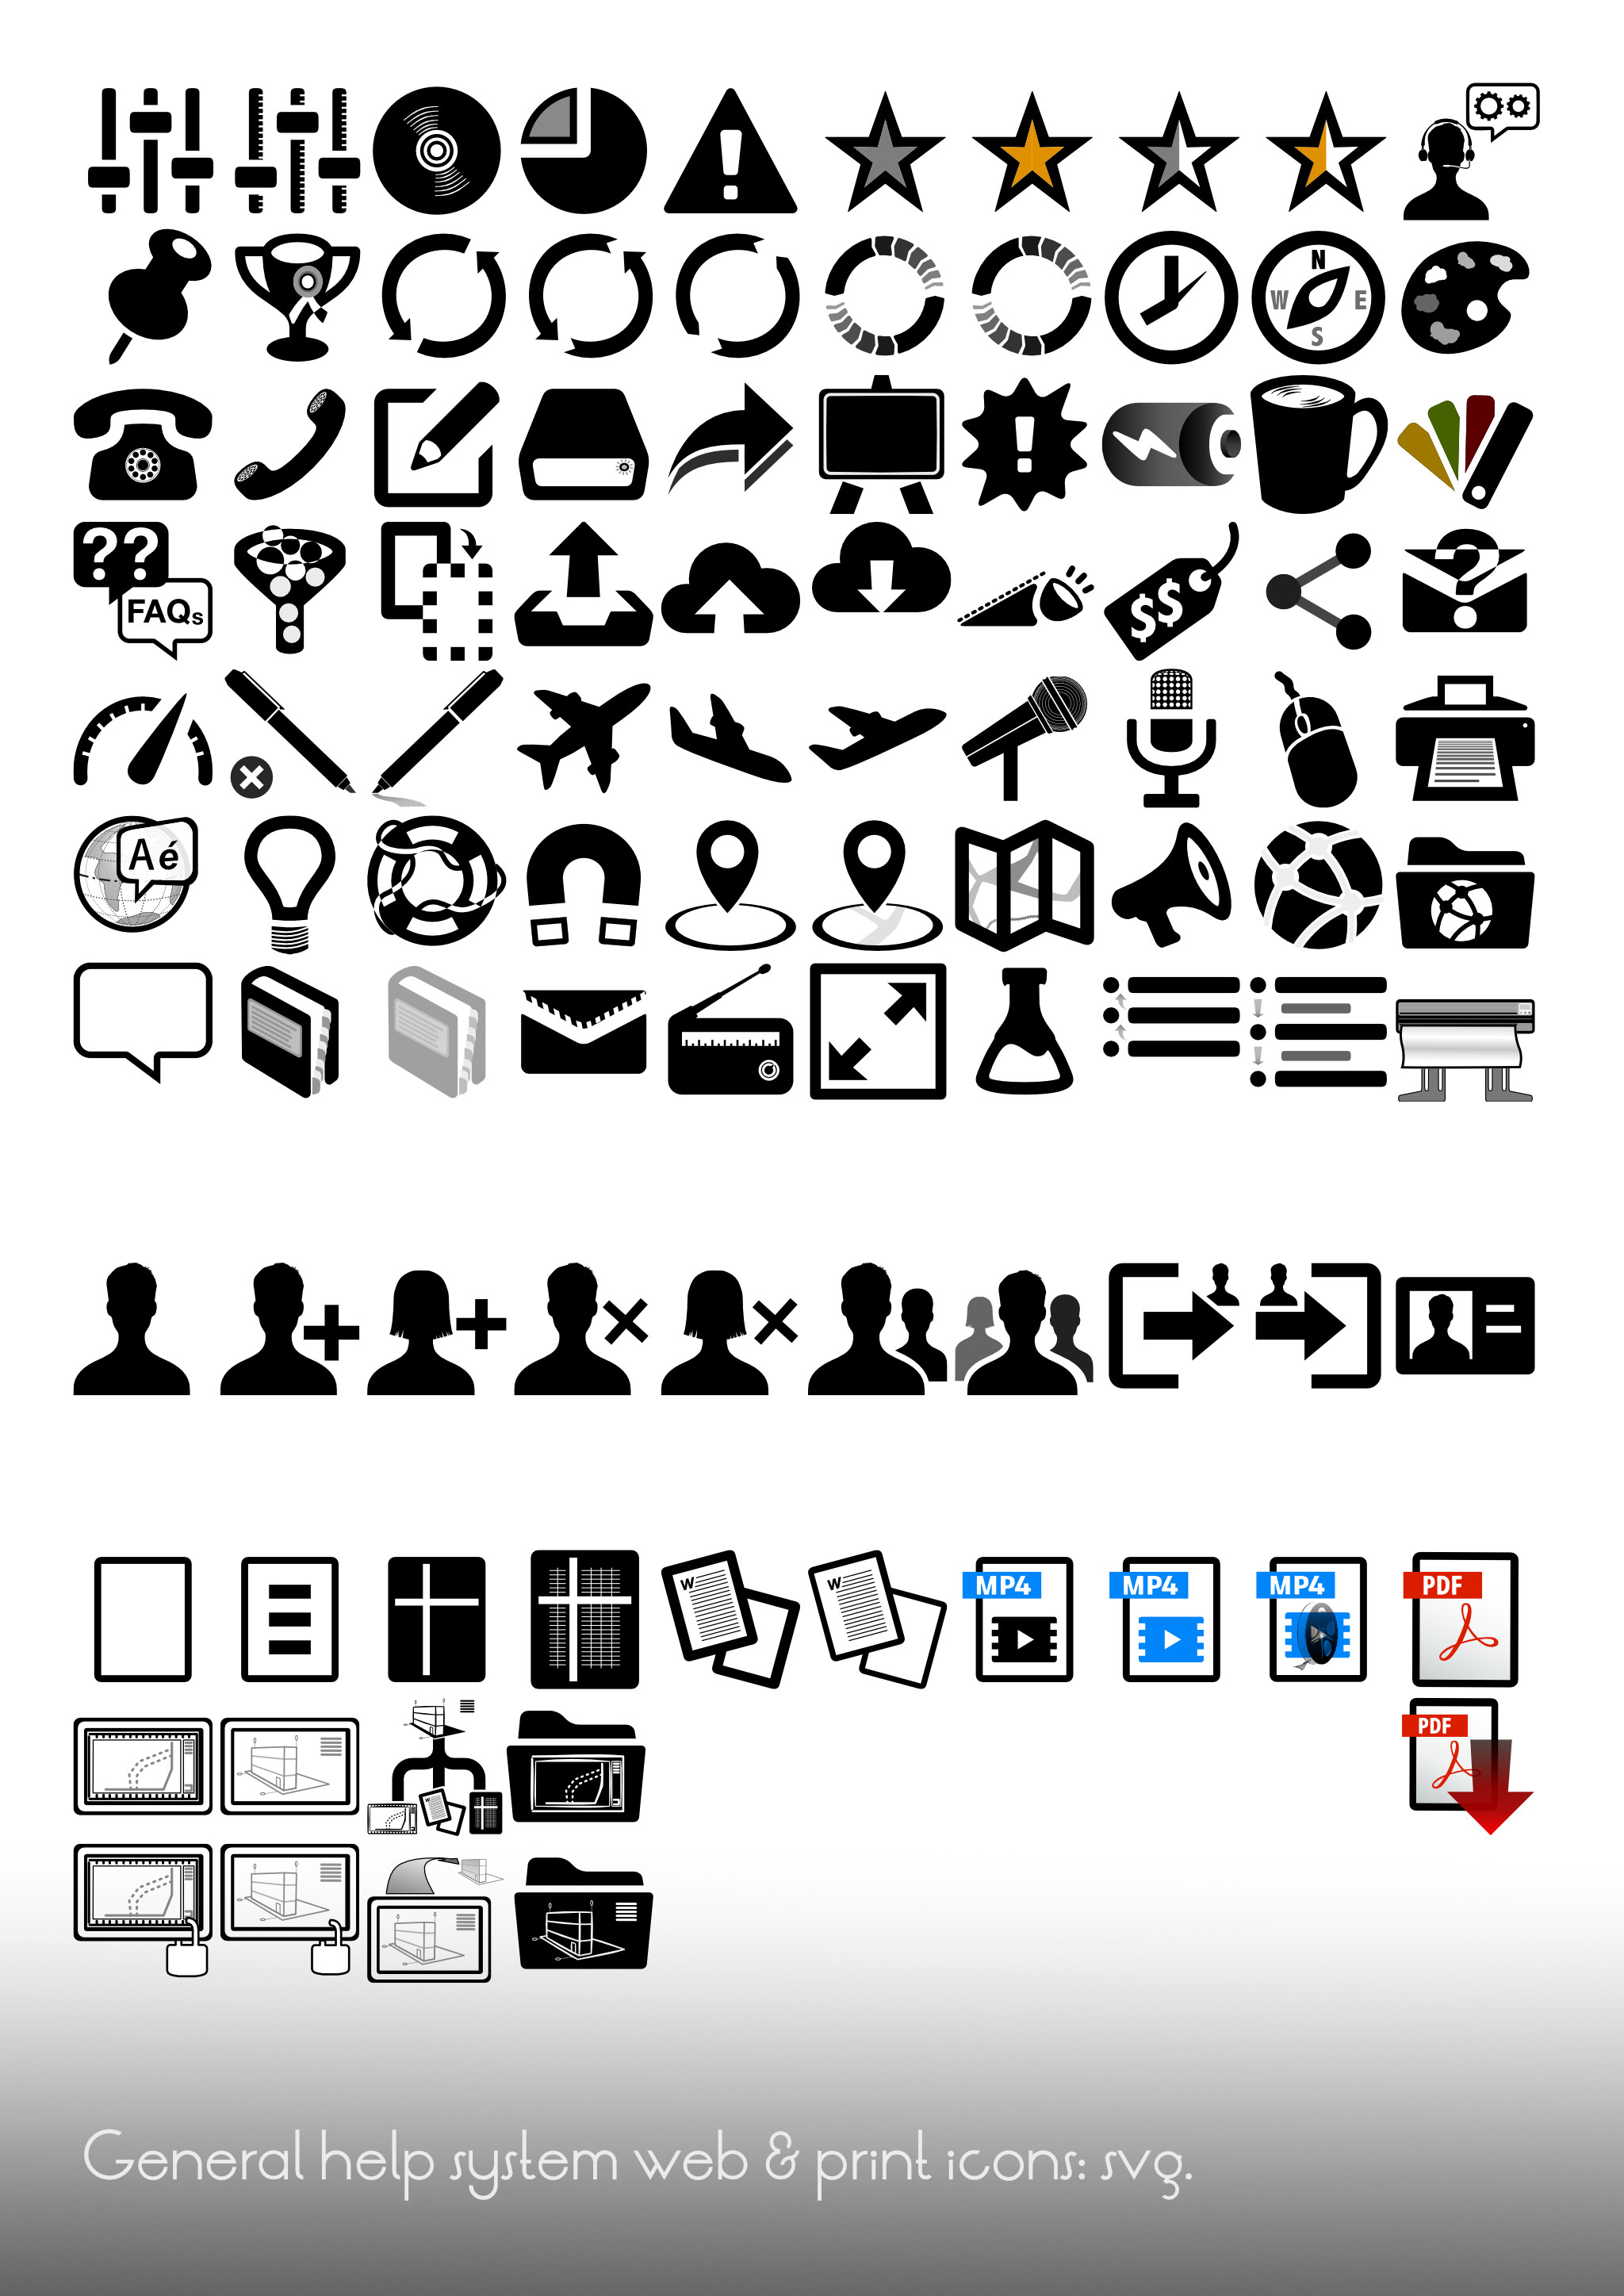 General-use icons developed for a client's extensive help system, starting with the open-source Entypo+ system as base; there are design variations created to keep stylistic consistency and many new icons designed for needed concepts.